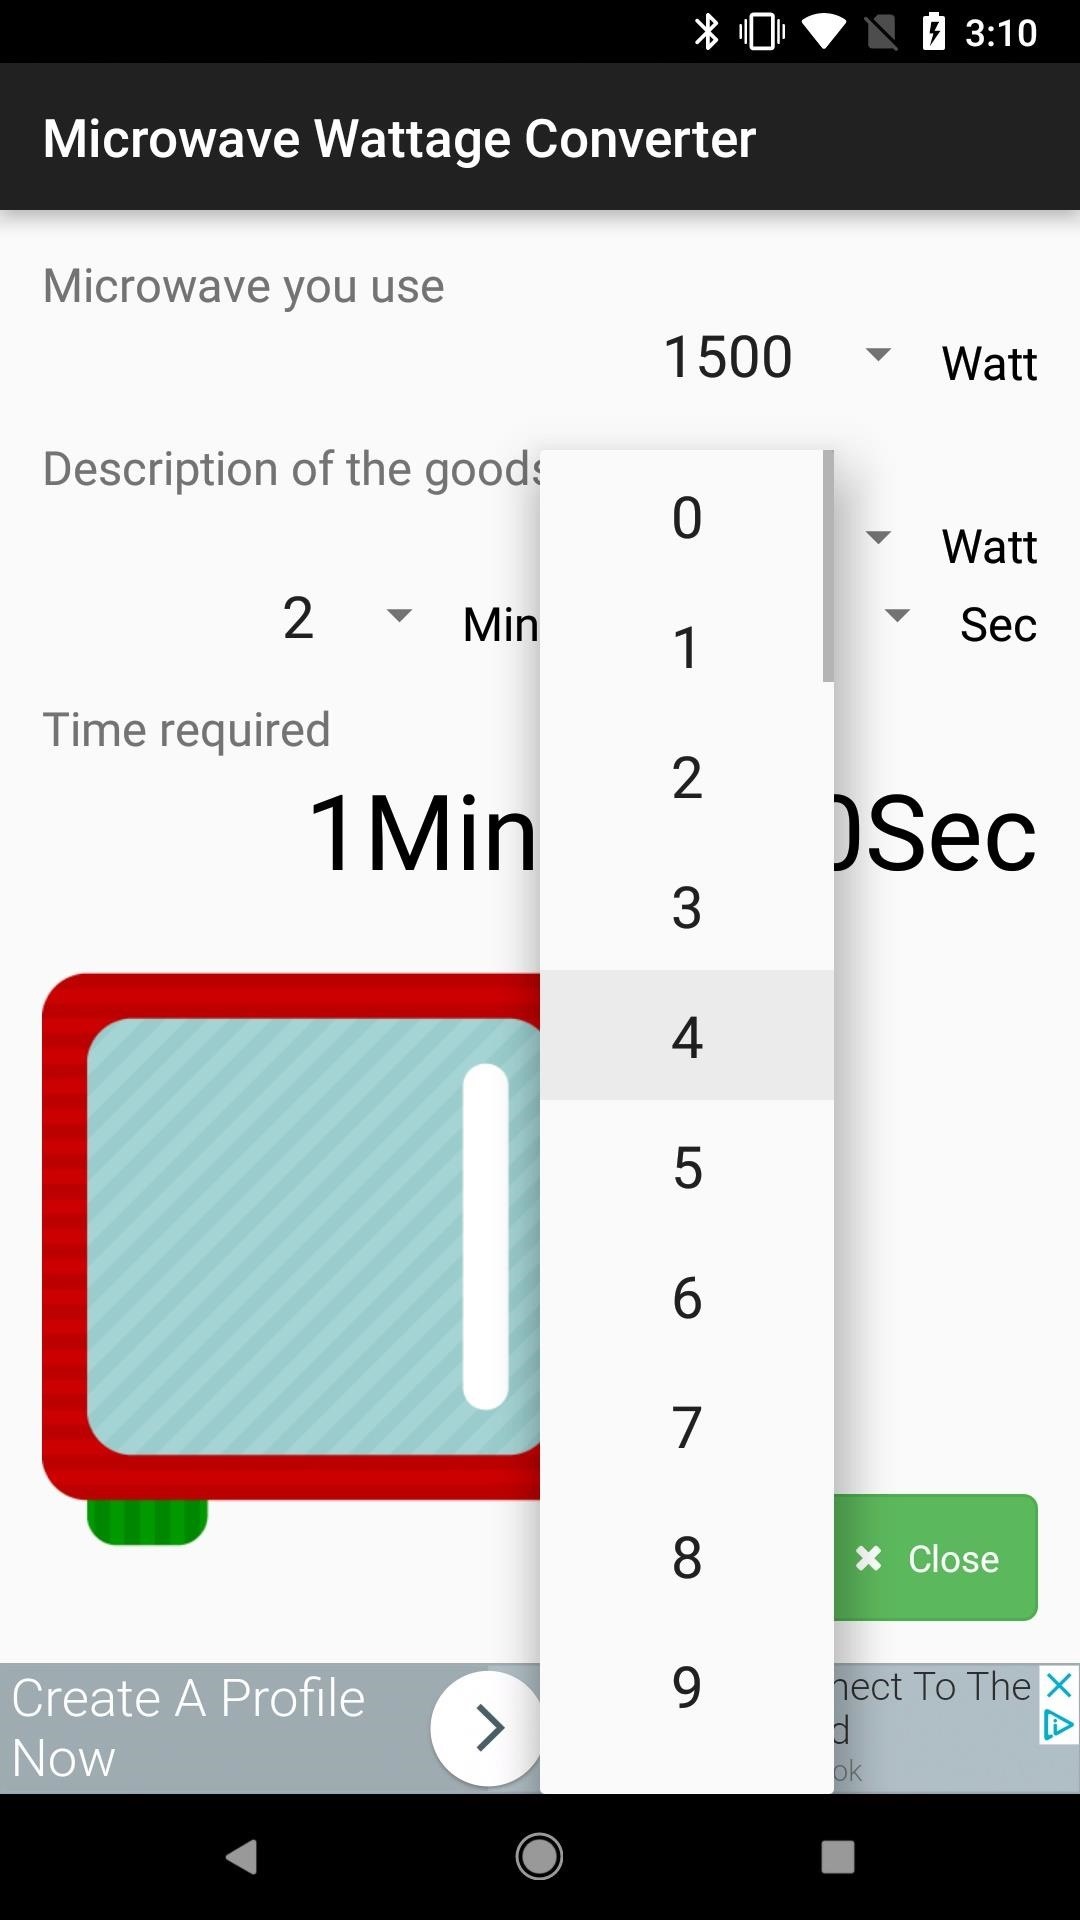 Easily Convert Cooking Times for Your Microwave's Wattage Using These Apps